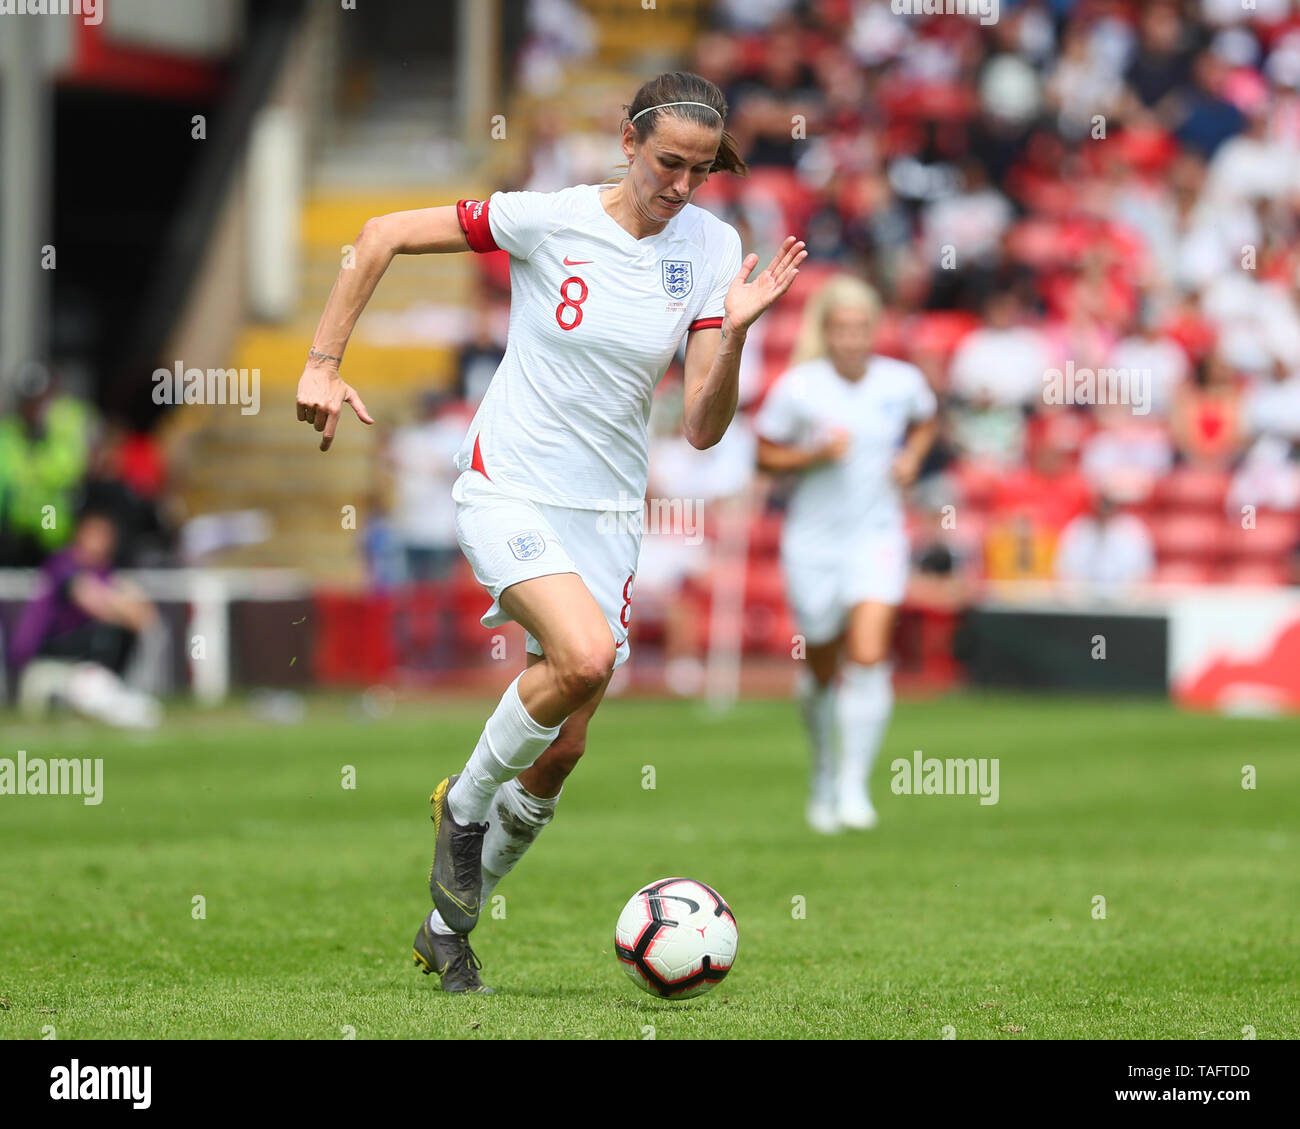 Walsall, United Kingdom. 25 May 2019. Jill Scott of England during Women's International Friendly between England Women and Denmark Women at Bank's Stadium , Walsall,  on 25 May 2019 Stock Photo